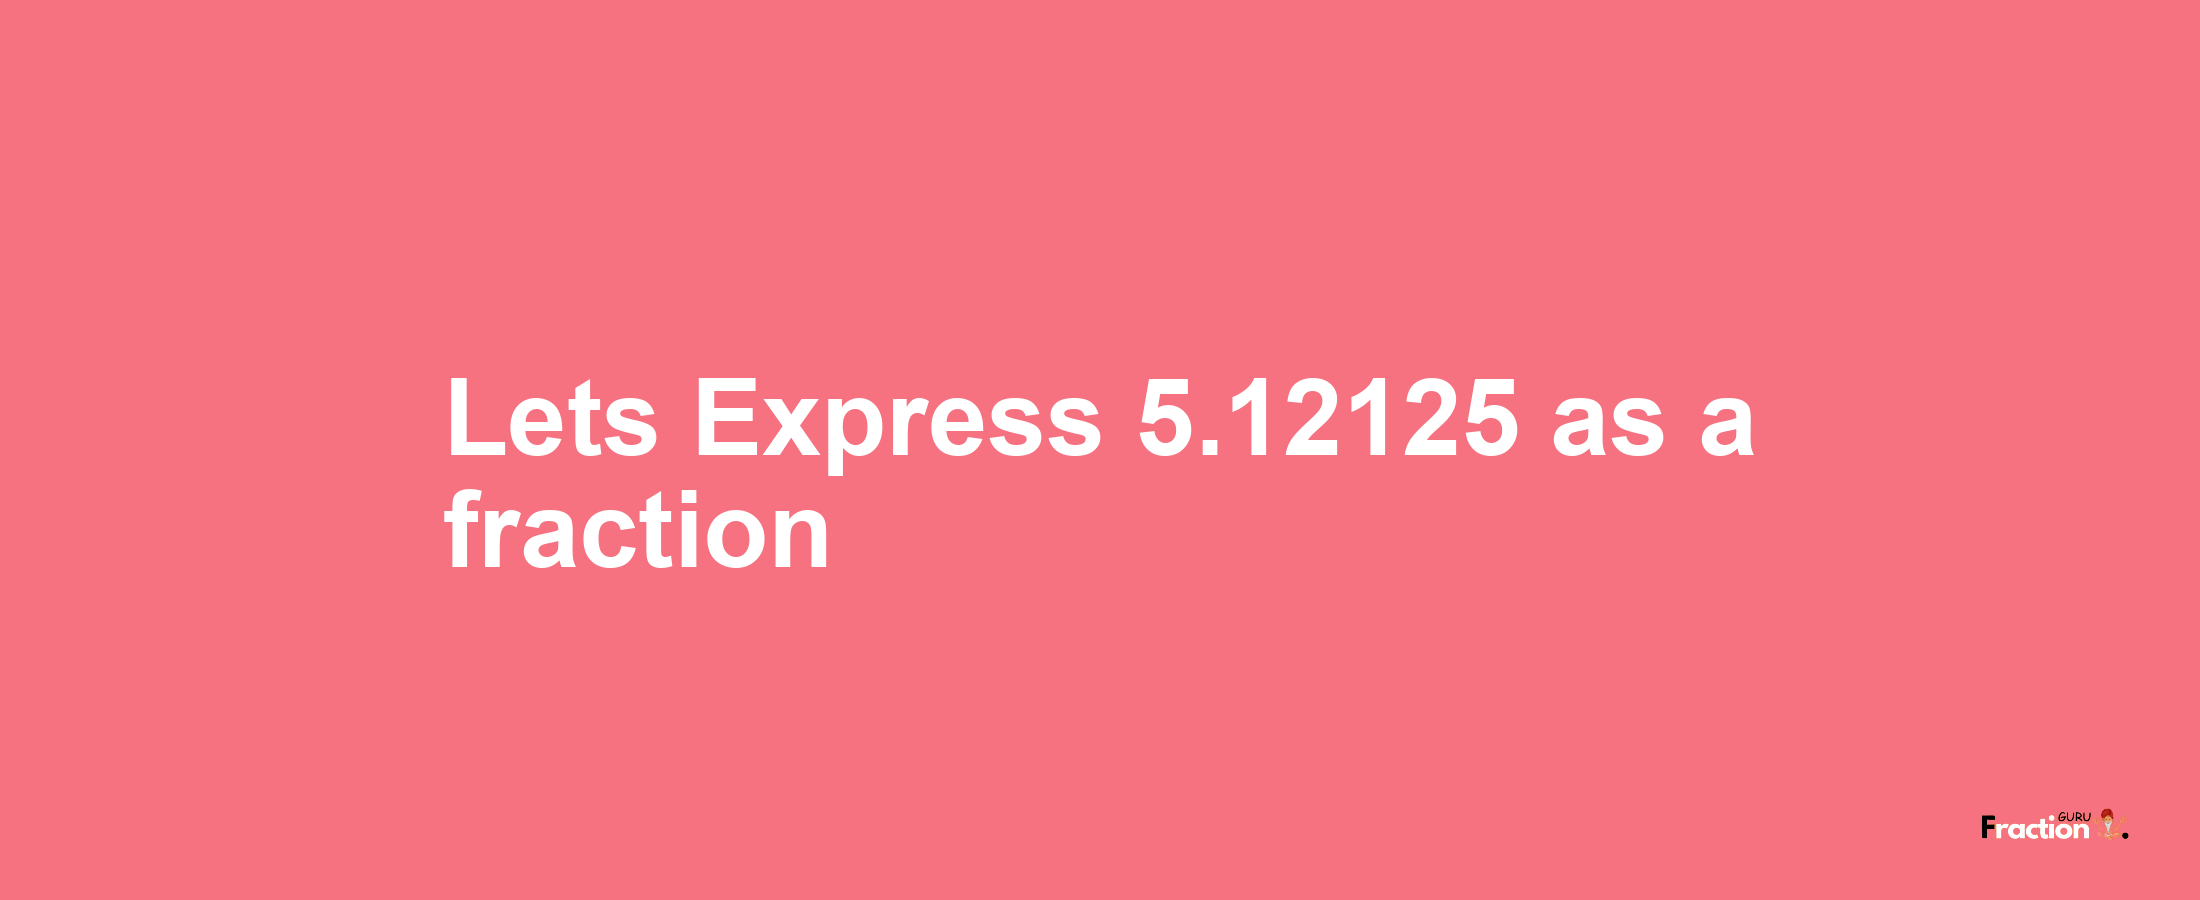 Lets Express 5.12125 as afraction